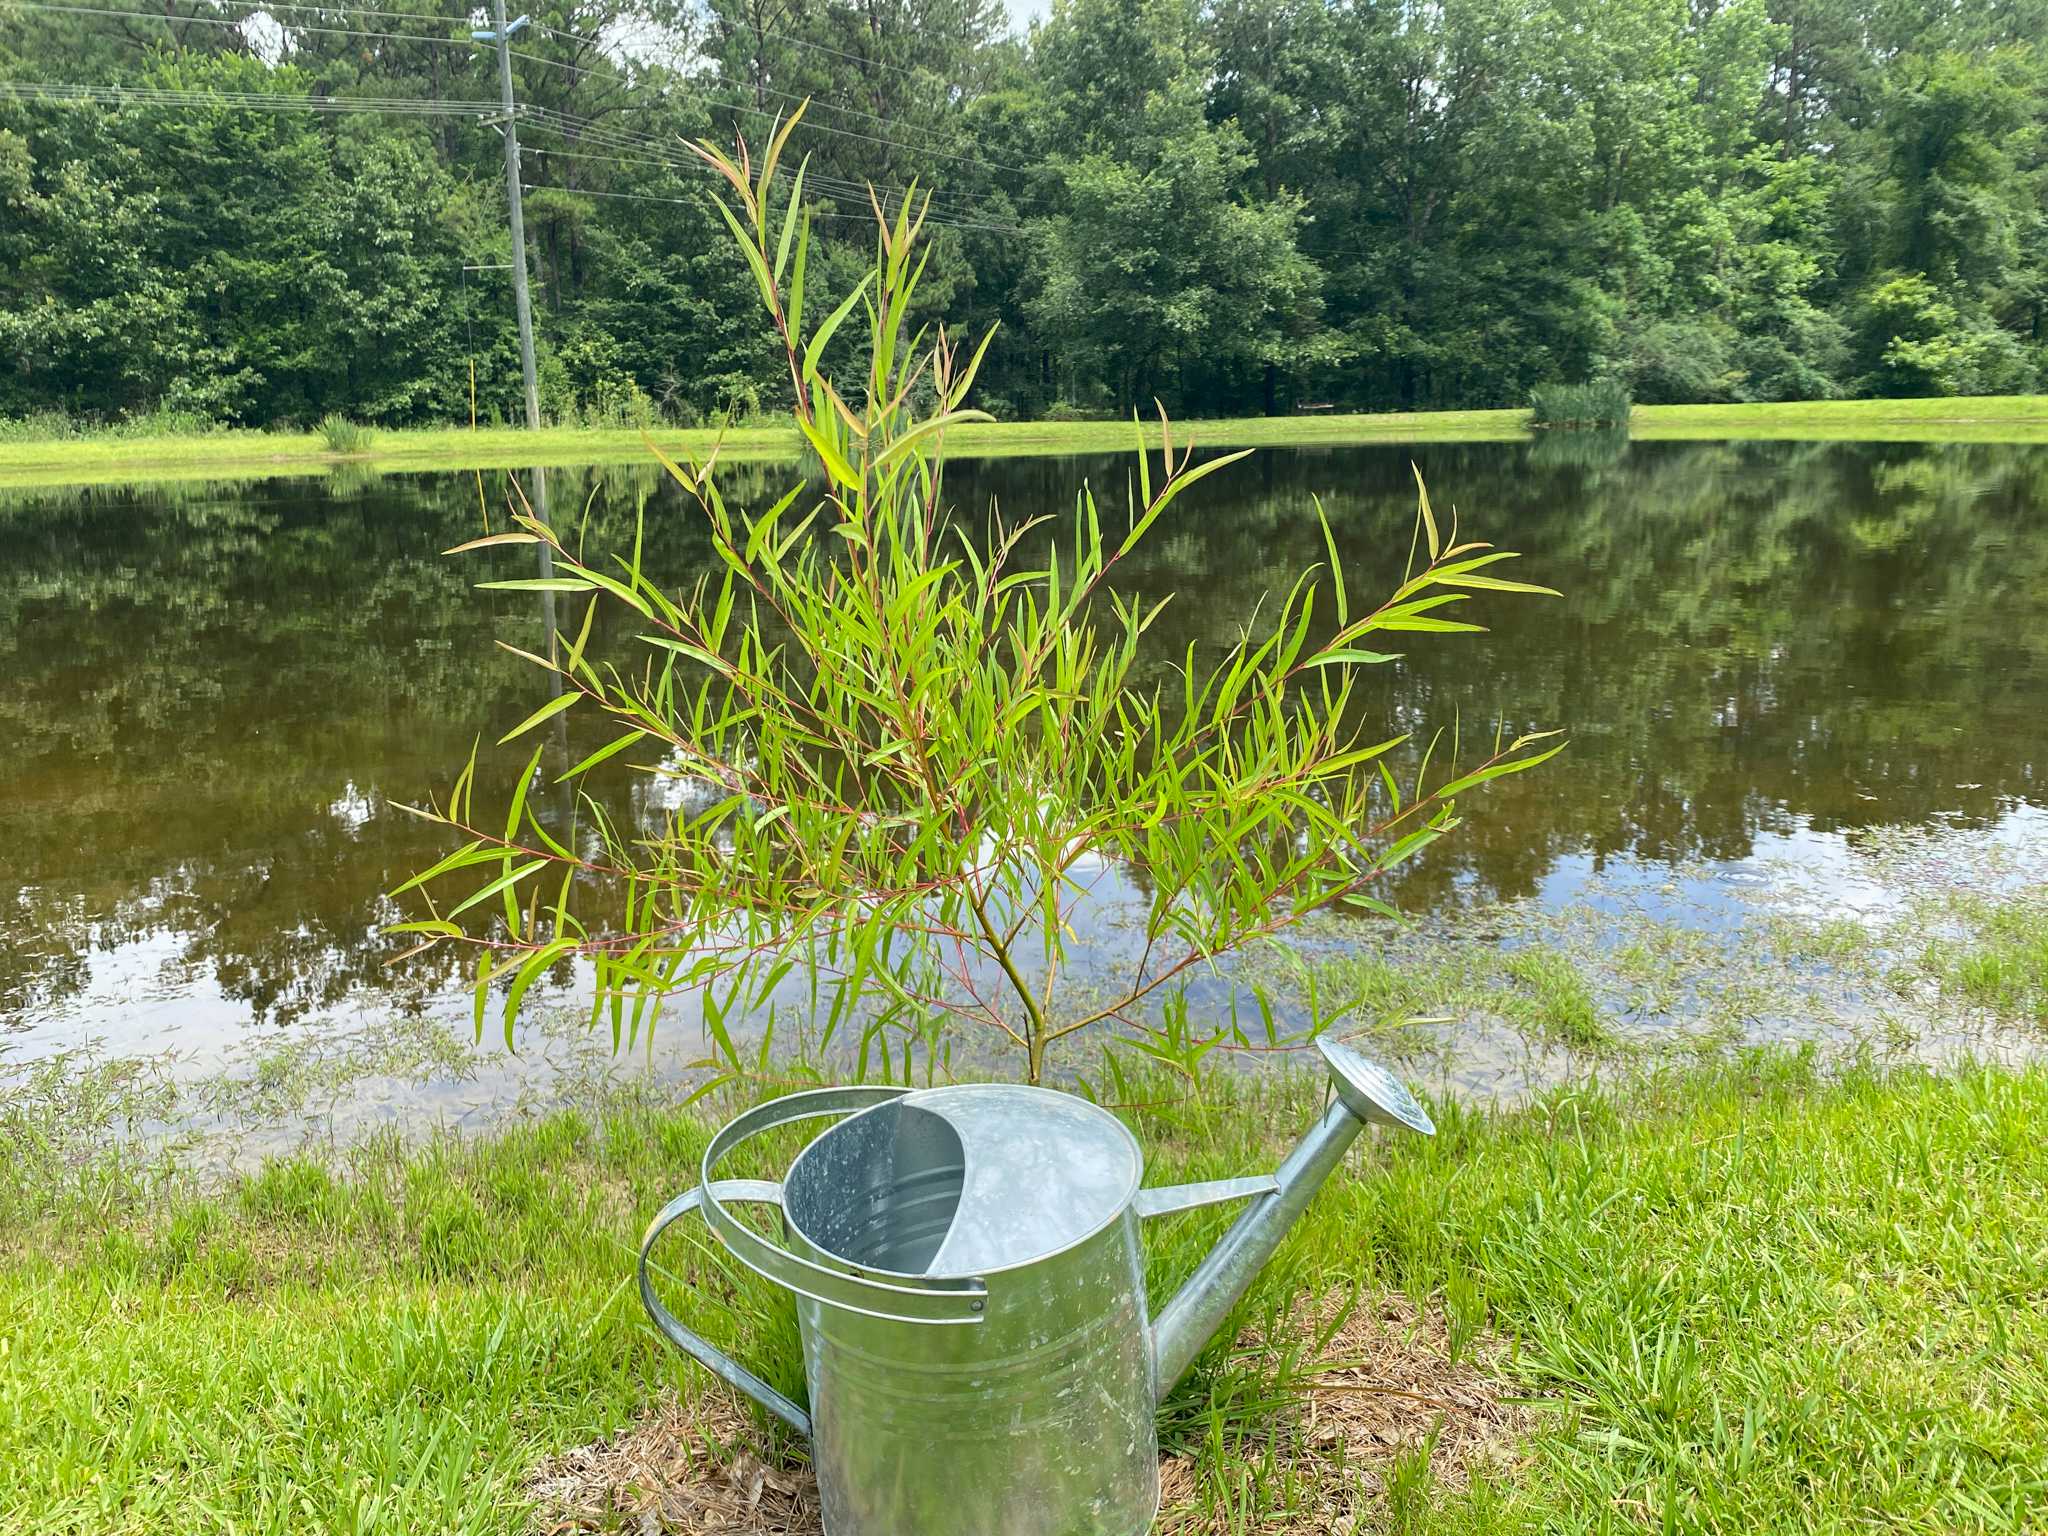 A metal watering can rests in front of a small Black Willow sapling, on the banks of a pond